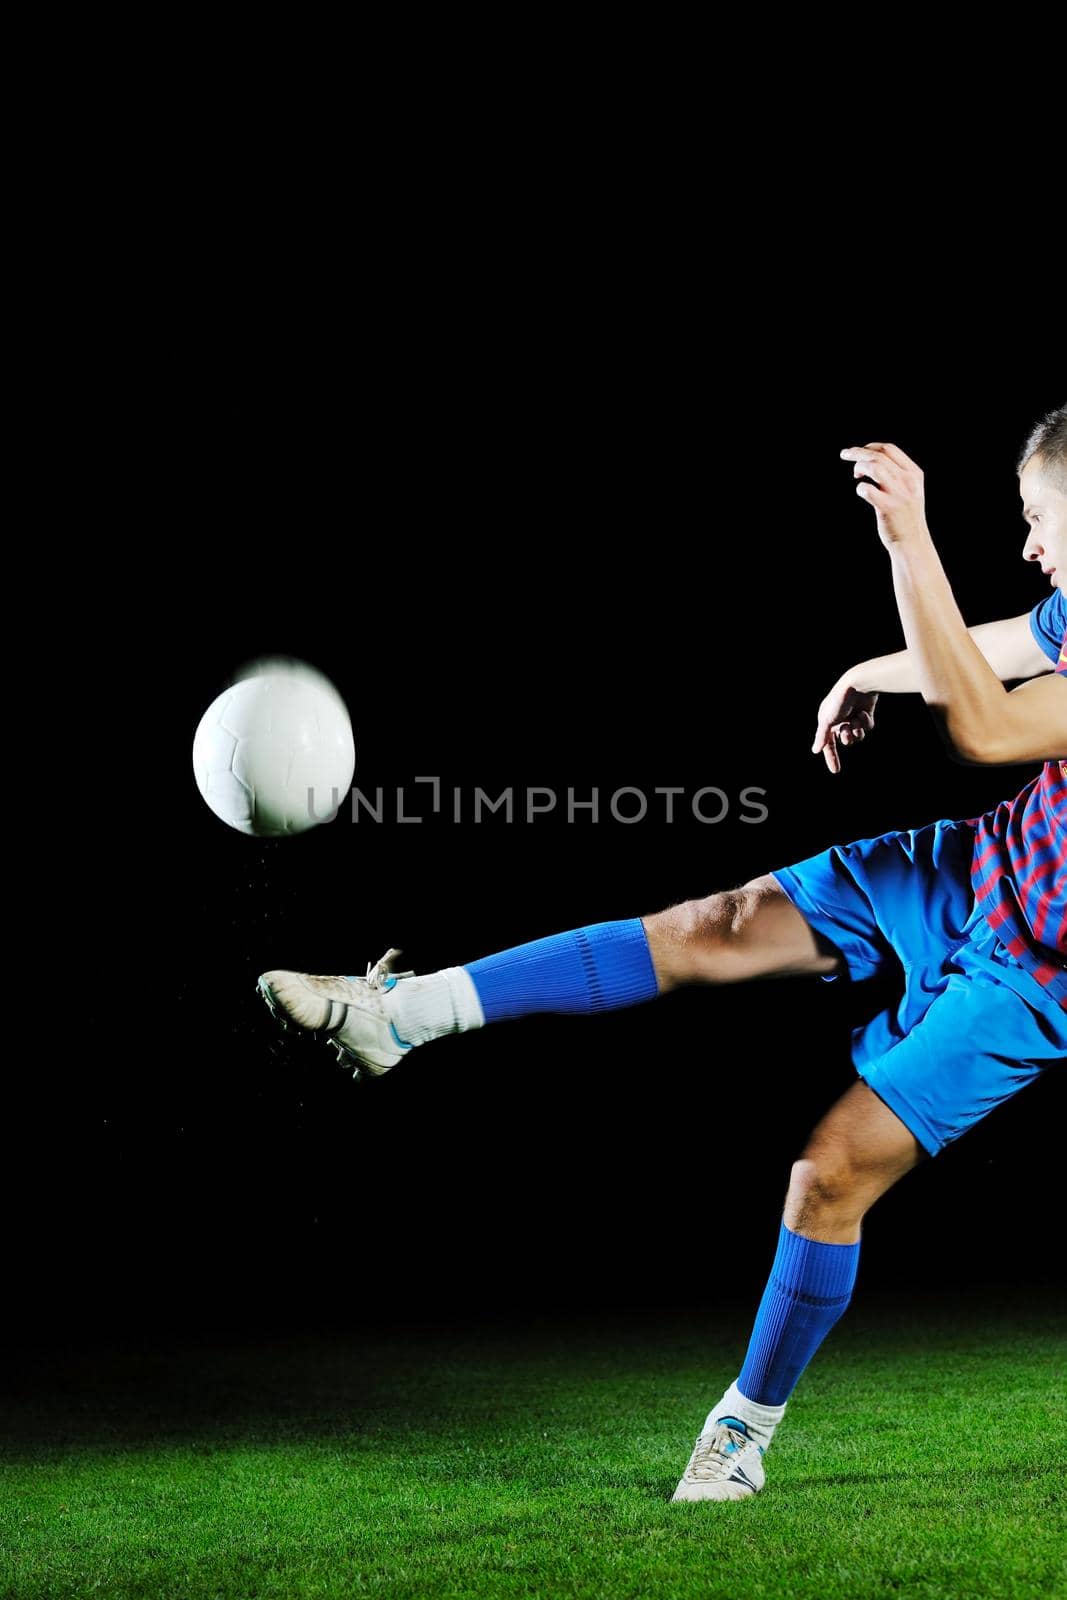 soccer player doing kick with ball on football stadium  field  isolated on black background  in night